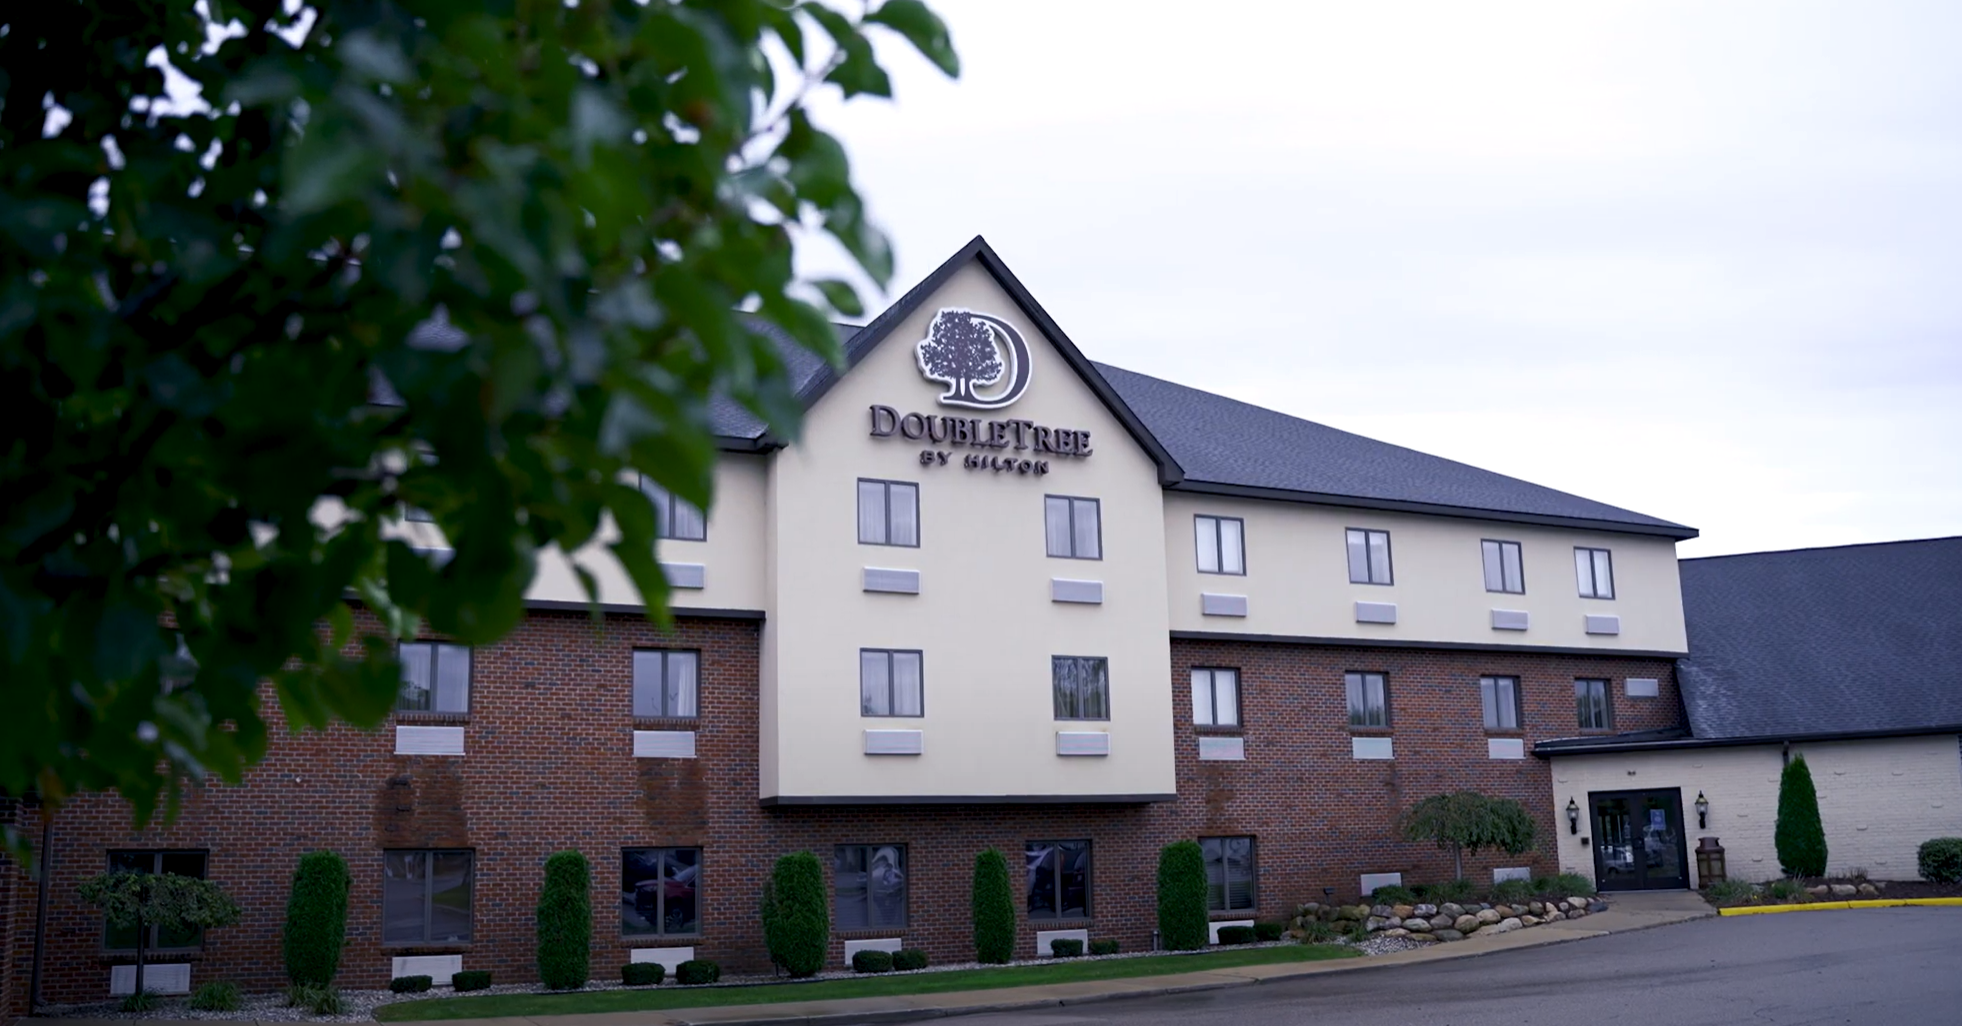 DoubleTree by Hilton Hotel in Port Huron